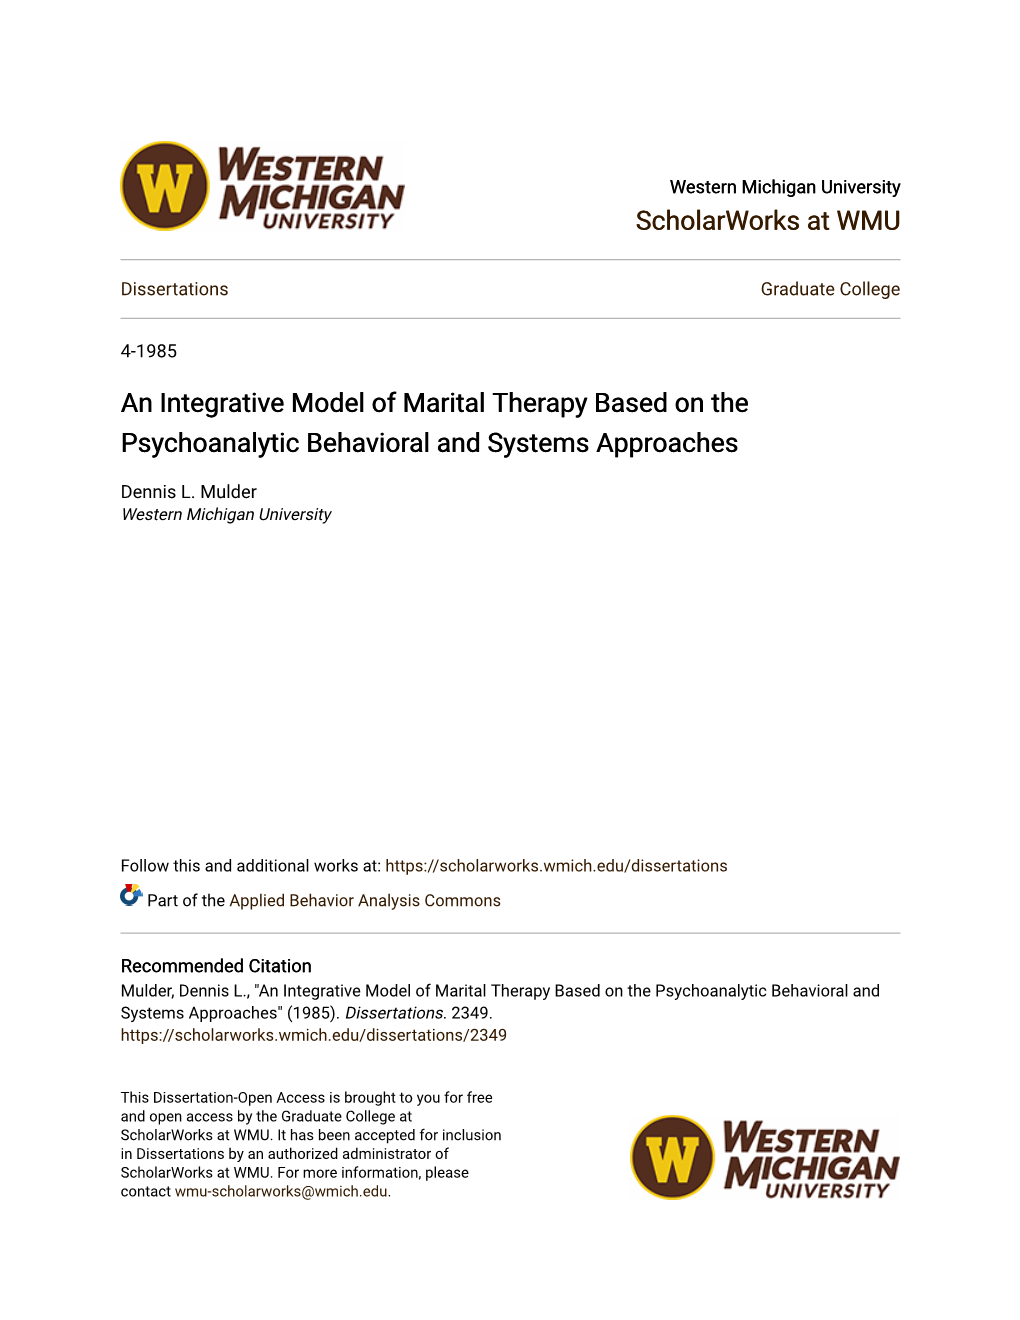 An Integrative Model of Marital Therapy Based on the Psychoanalytic Behavioral and Systems Approaches